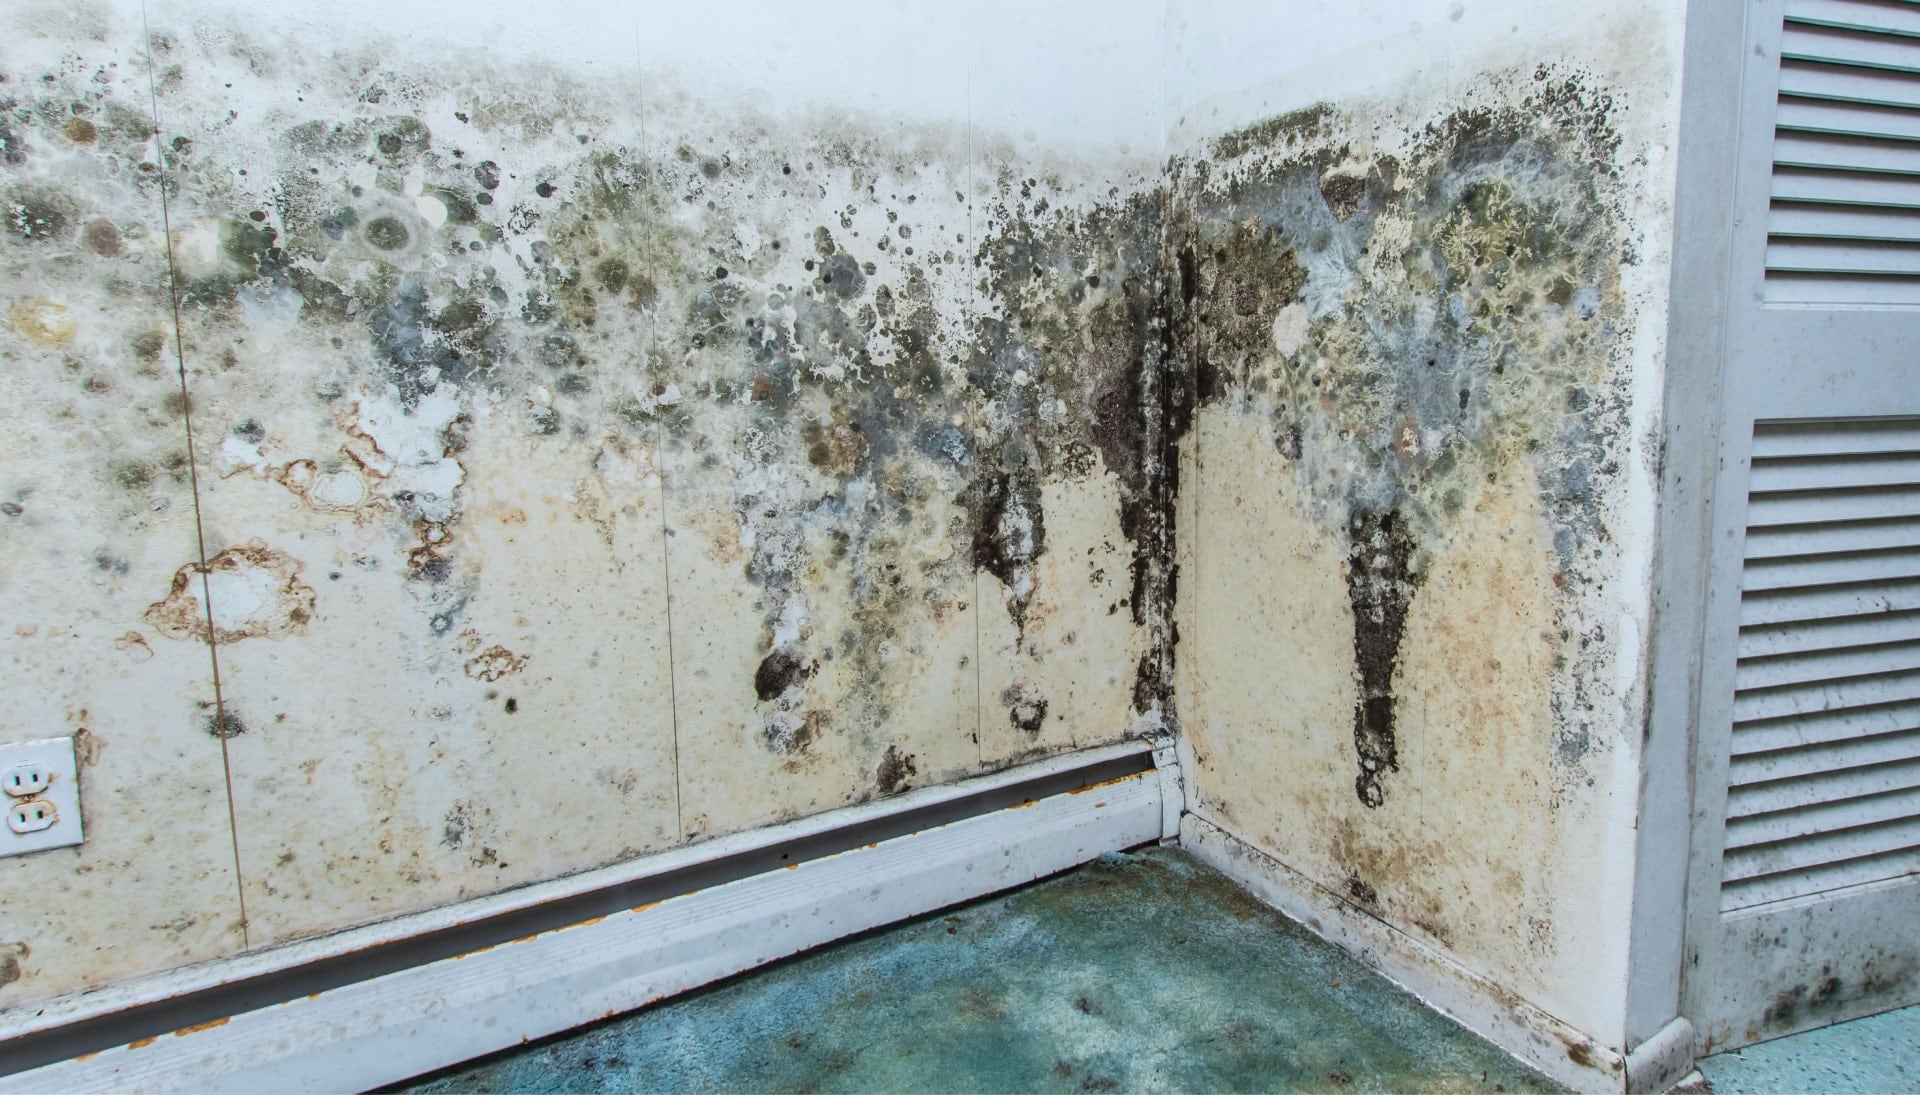 Professional mold removal, odor control, and water damage restoration service in Marco Island, Florida.